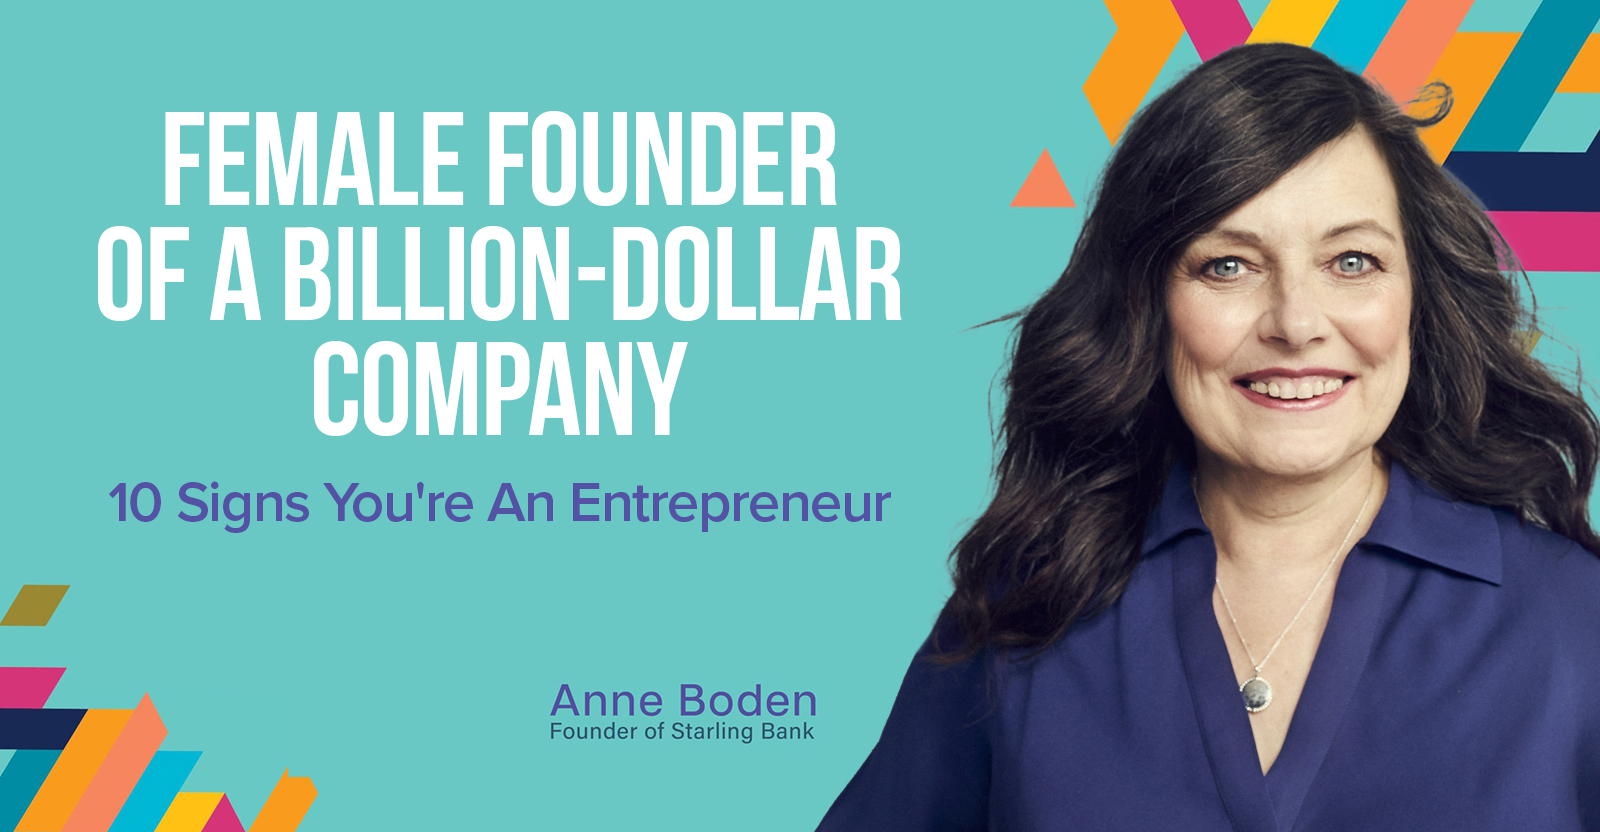 Promotional banner featuring Anne Boden, a woman with dark hair in a navy blazer, titled "Female Founder of a Billion-Dollar Company" with text "10 Signs You're an Entrepreneur".